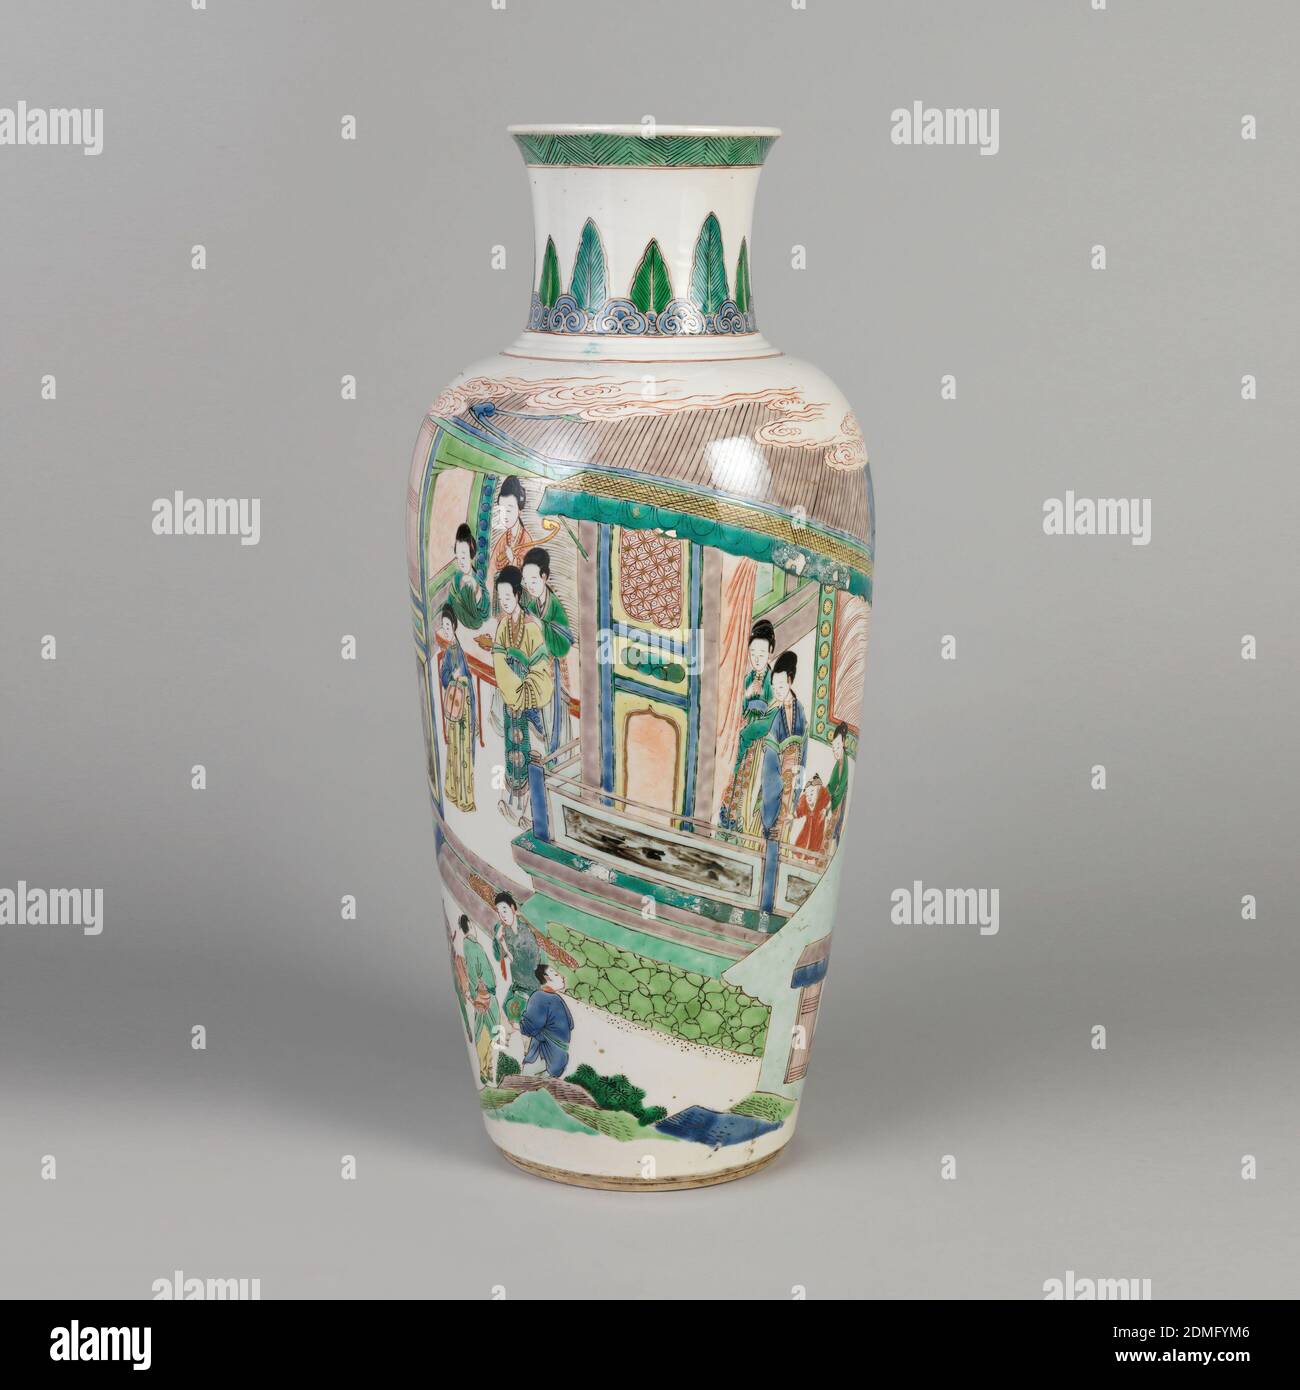 Vase, Enameled and glazed porcelain, 'Famille verte' decoration; oviform vase; the sides depicting women watching from a doorway as a nobleman departs in a rickshaw., China, 17th–18th century, ceramics, Decorative Arts, Vase Stock Photo